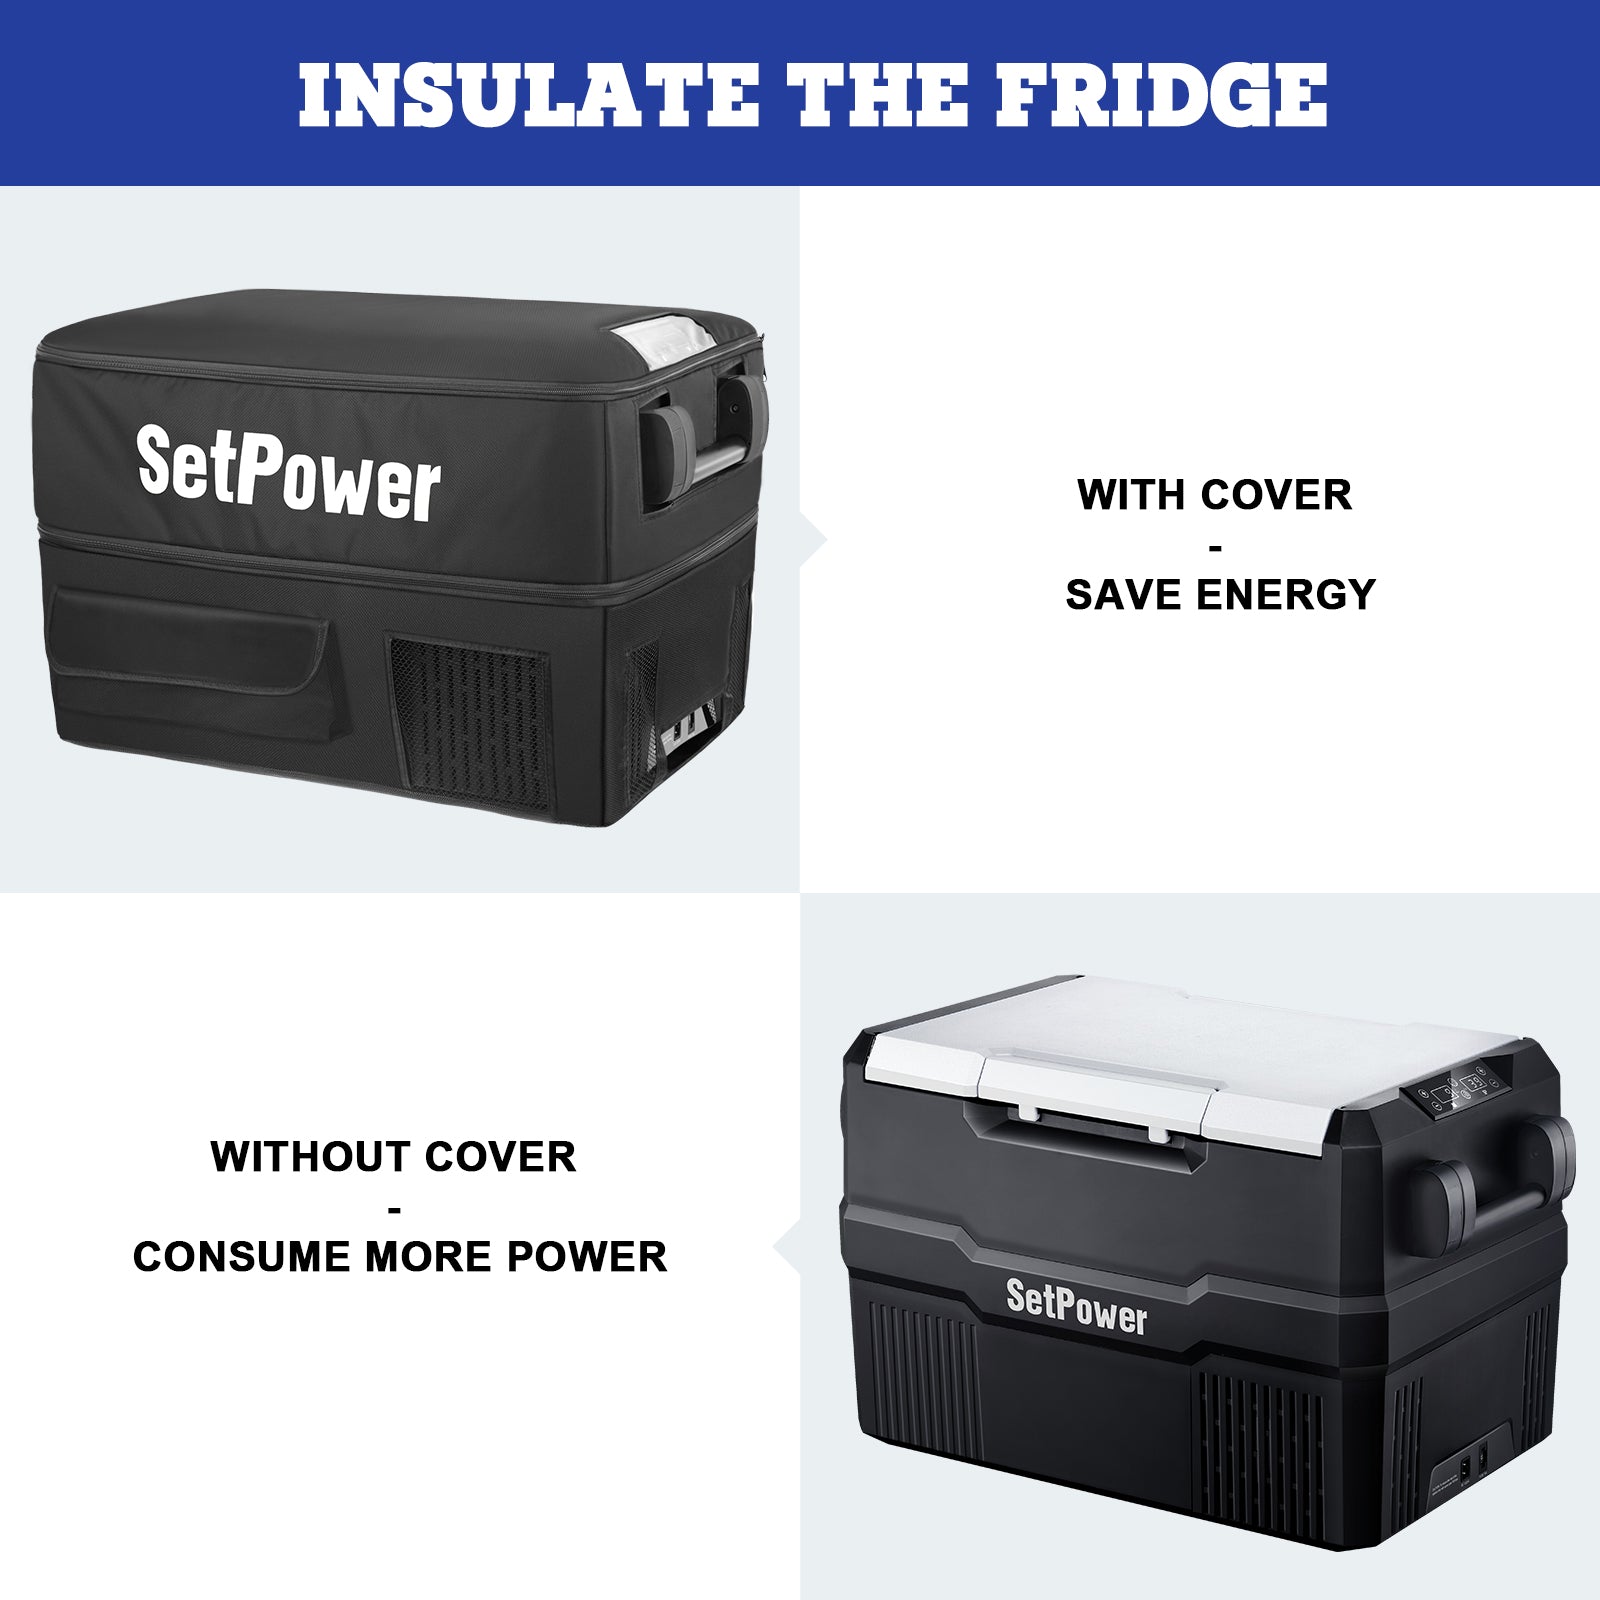 Setpower Insulated Protective Cover For RV45/60D Pro freezer